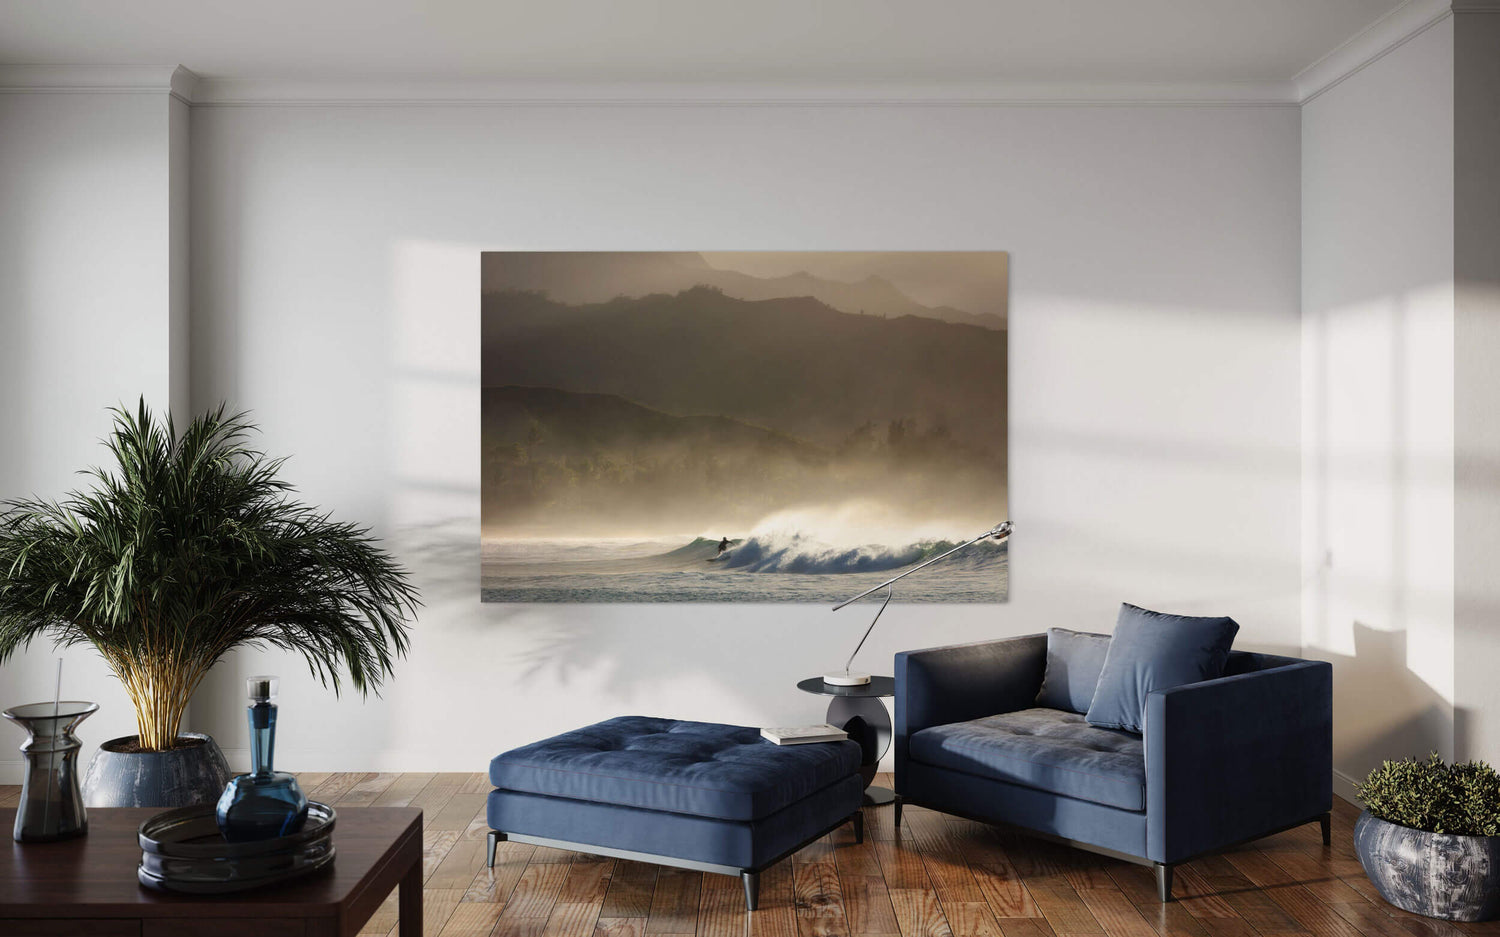 A Hanalei Bay surfing picture from Kauai hangs in a living room.